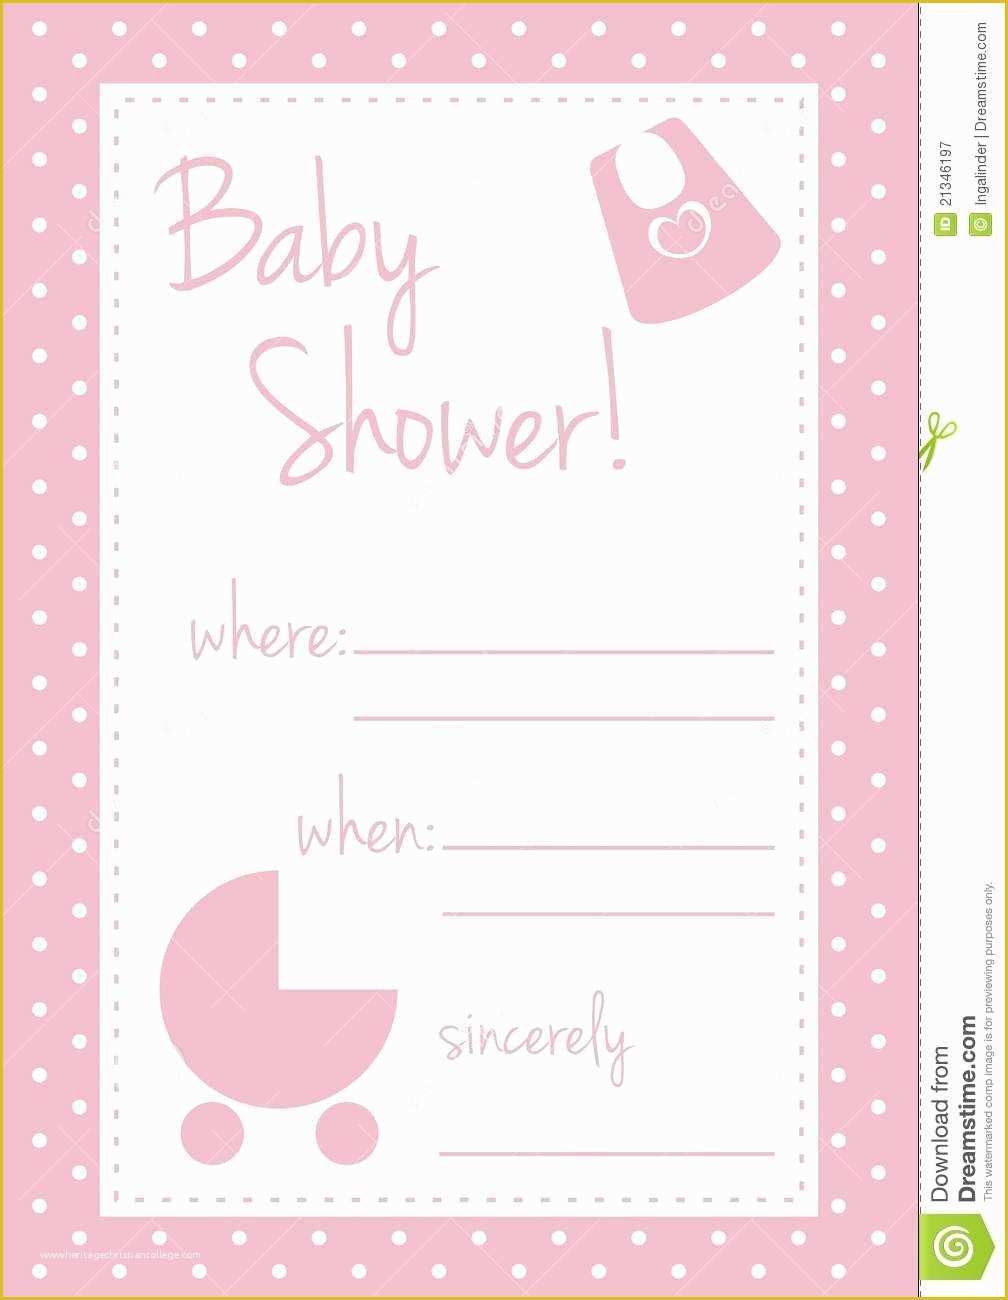 Baby Shower Card Template Free Of Baby Shower Invitation Card